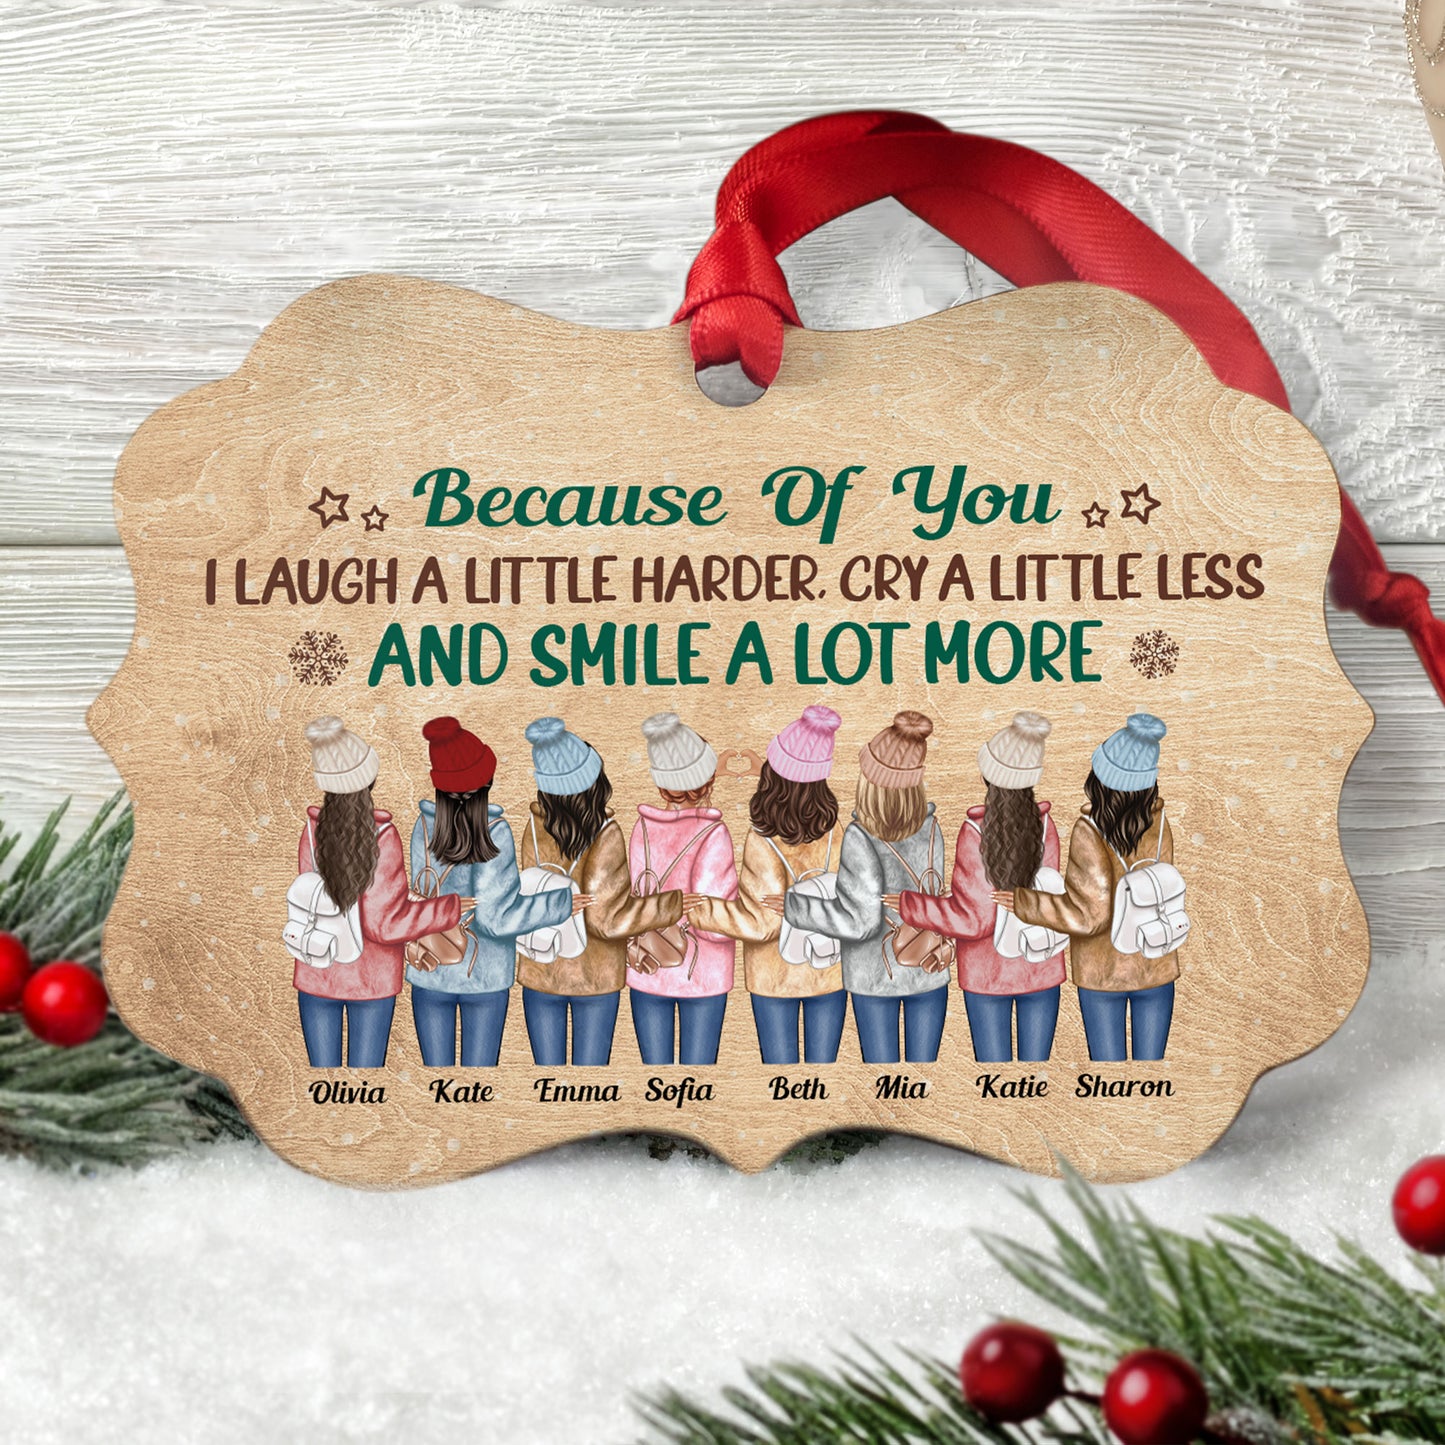 Life Is Better With Sisters - Personalized Wooden/Aluminum Ornament - Christmas Gift For Sisters